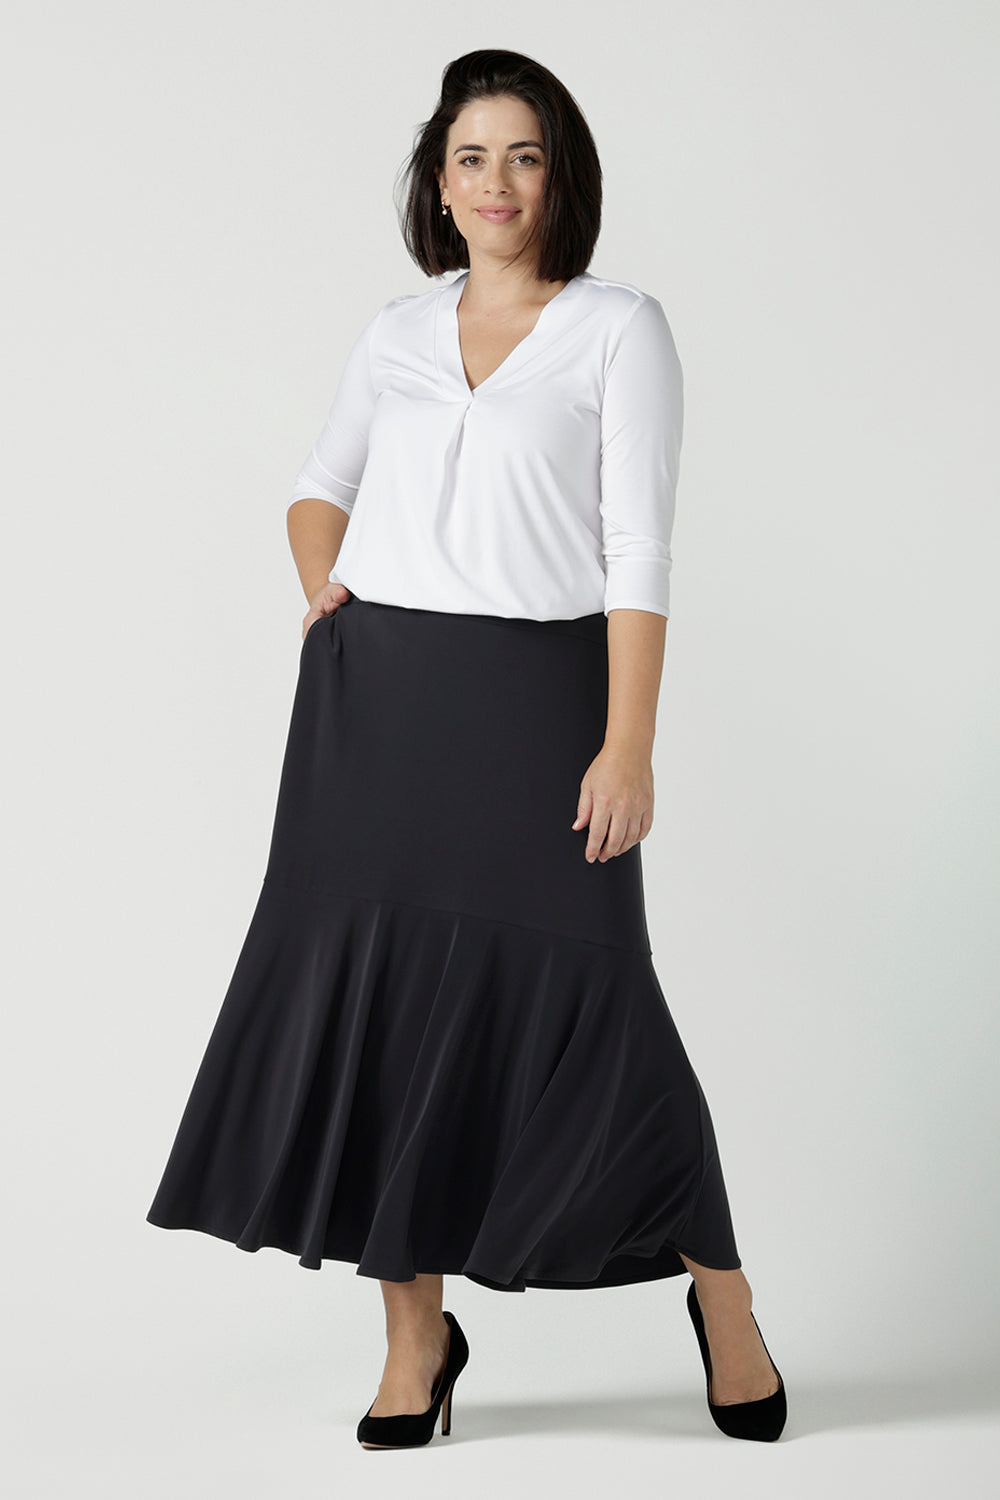 Size 10 wears the Berit Maxi skirt in Charcoal. A women's jersey work skirt with pockets in a charcoal colour. Made in Australia for women size 8 - 24. Styled back with the Jaime top in white bamboo with 3/4 sleeves.